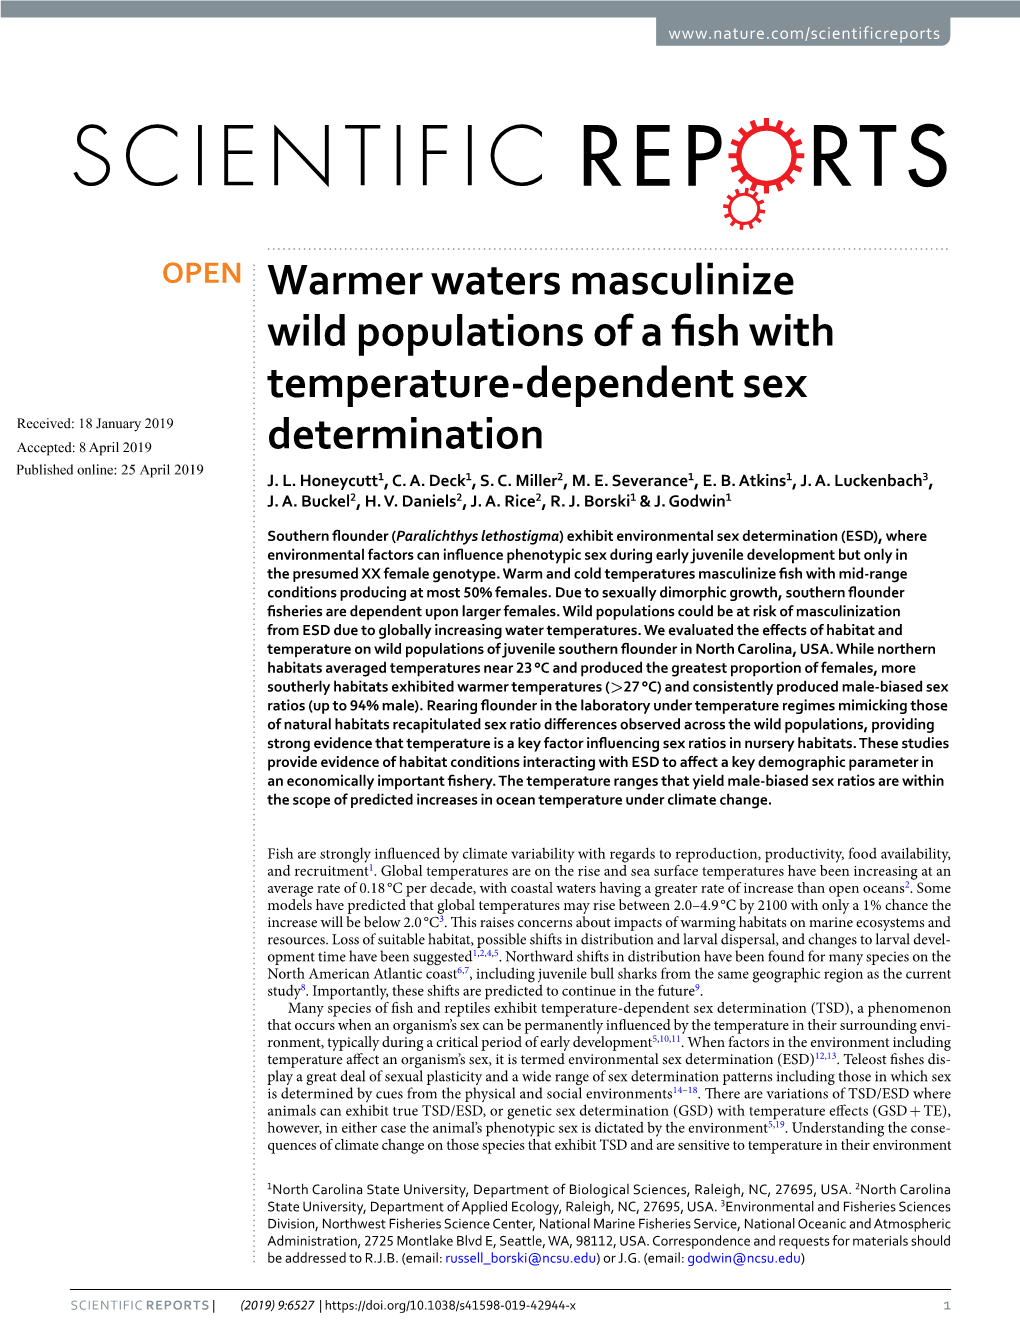 Warmer Waters Masculinize Wild Populations of a Fish